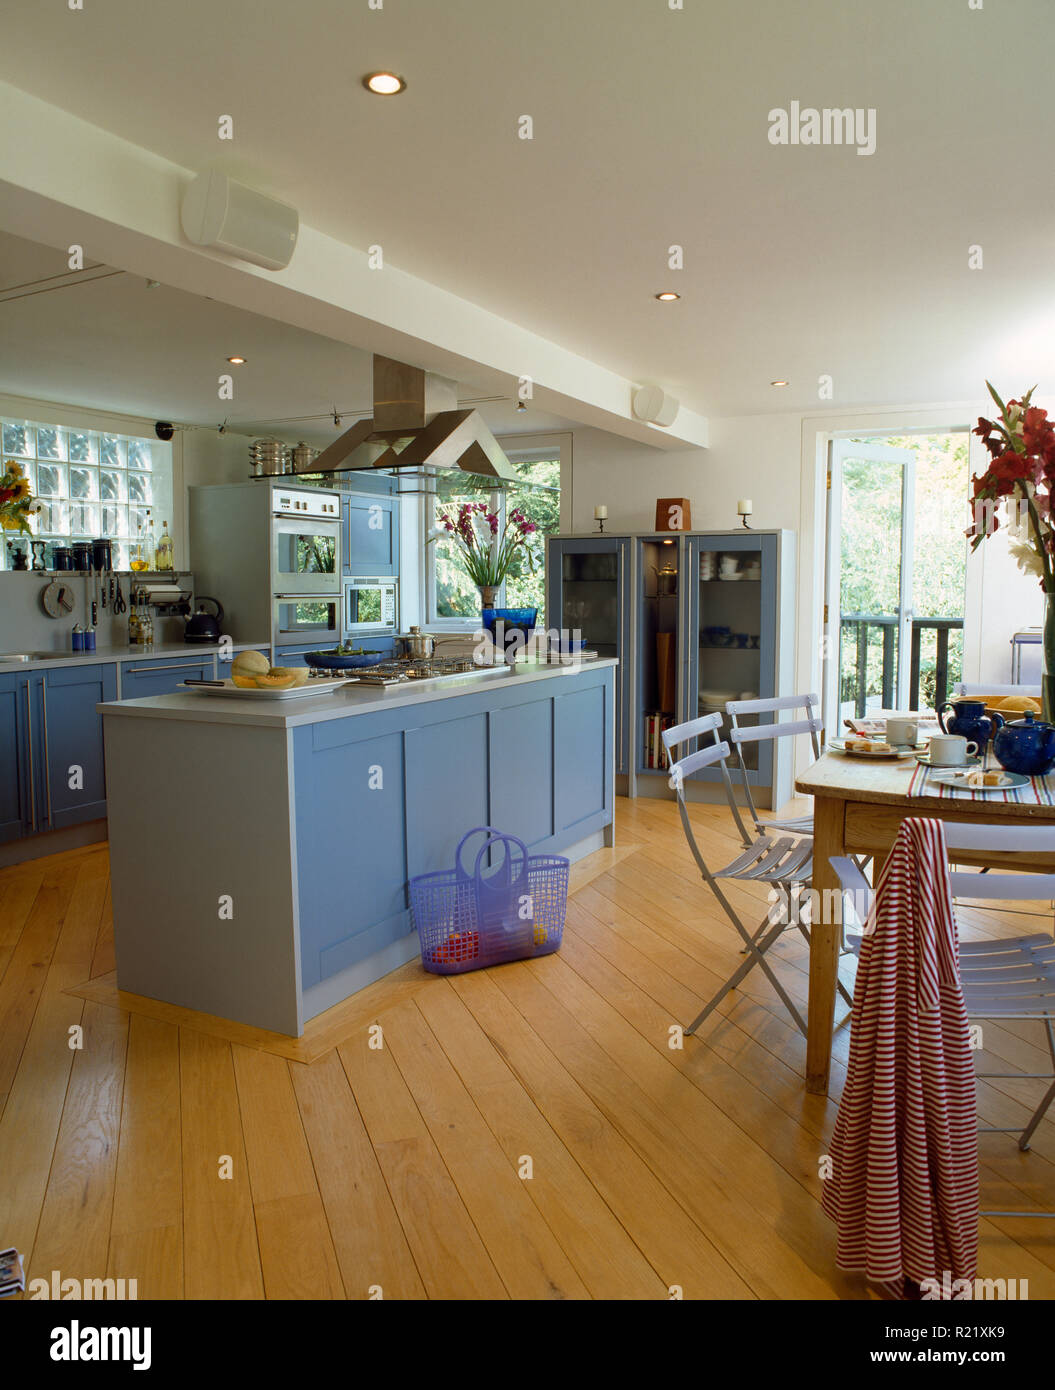 Pale blue doors on island unit in modern kitchen with wooden floor Stock Photo